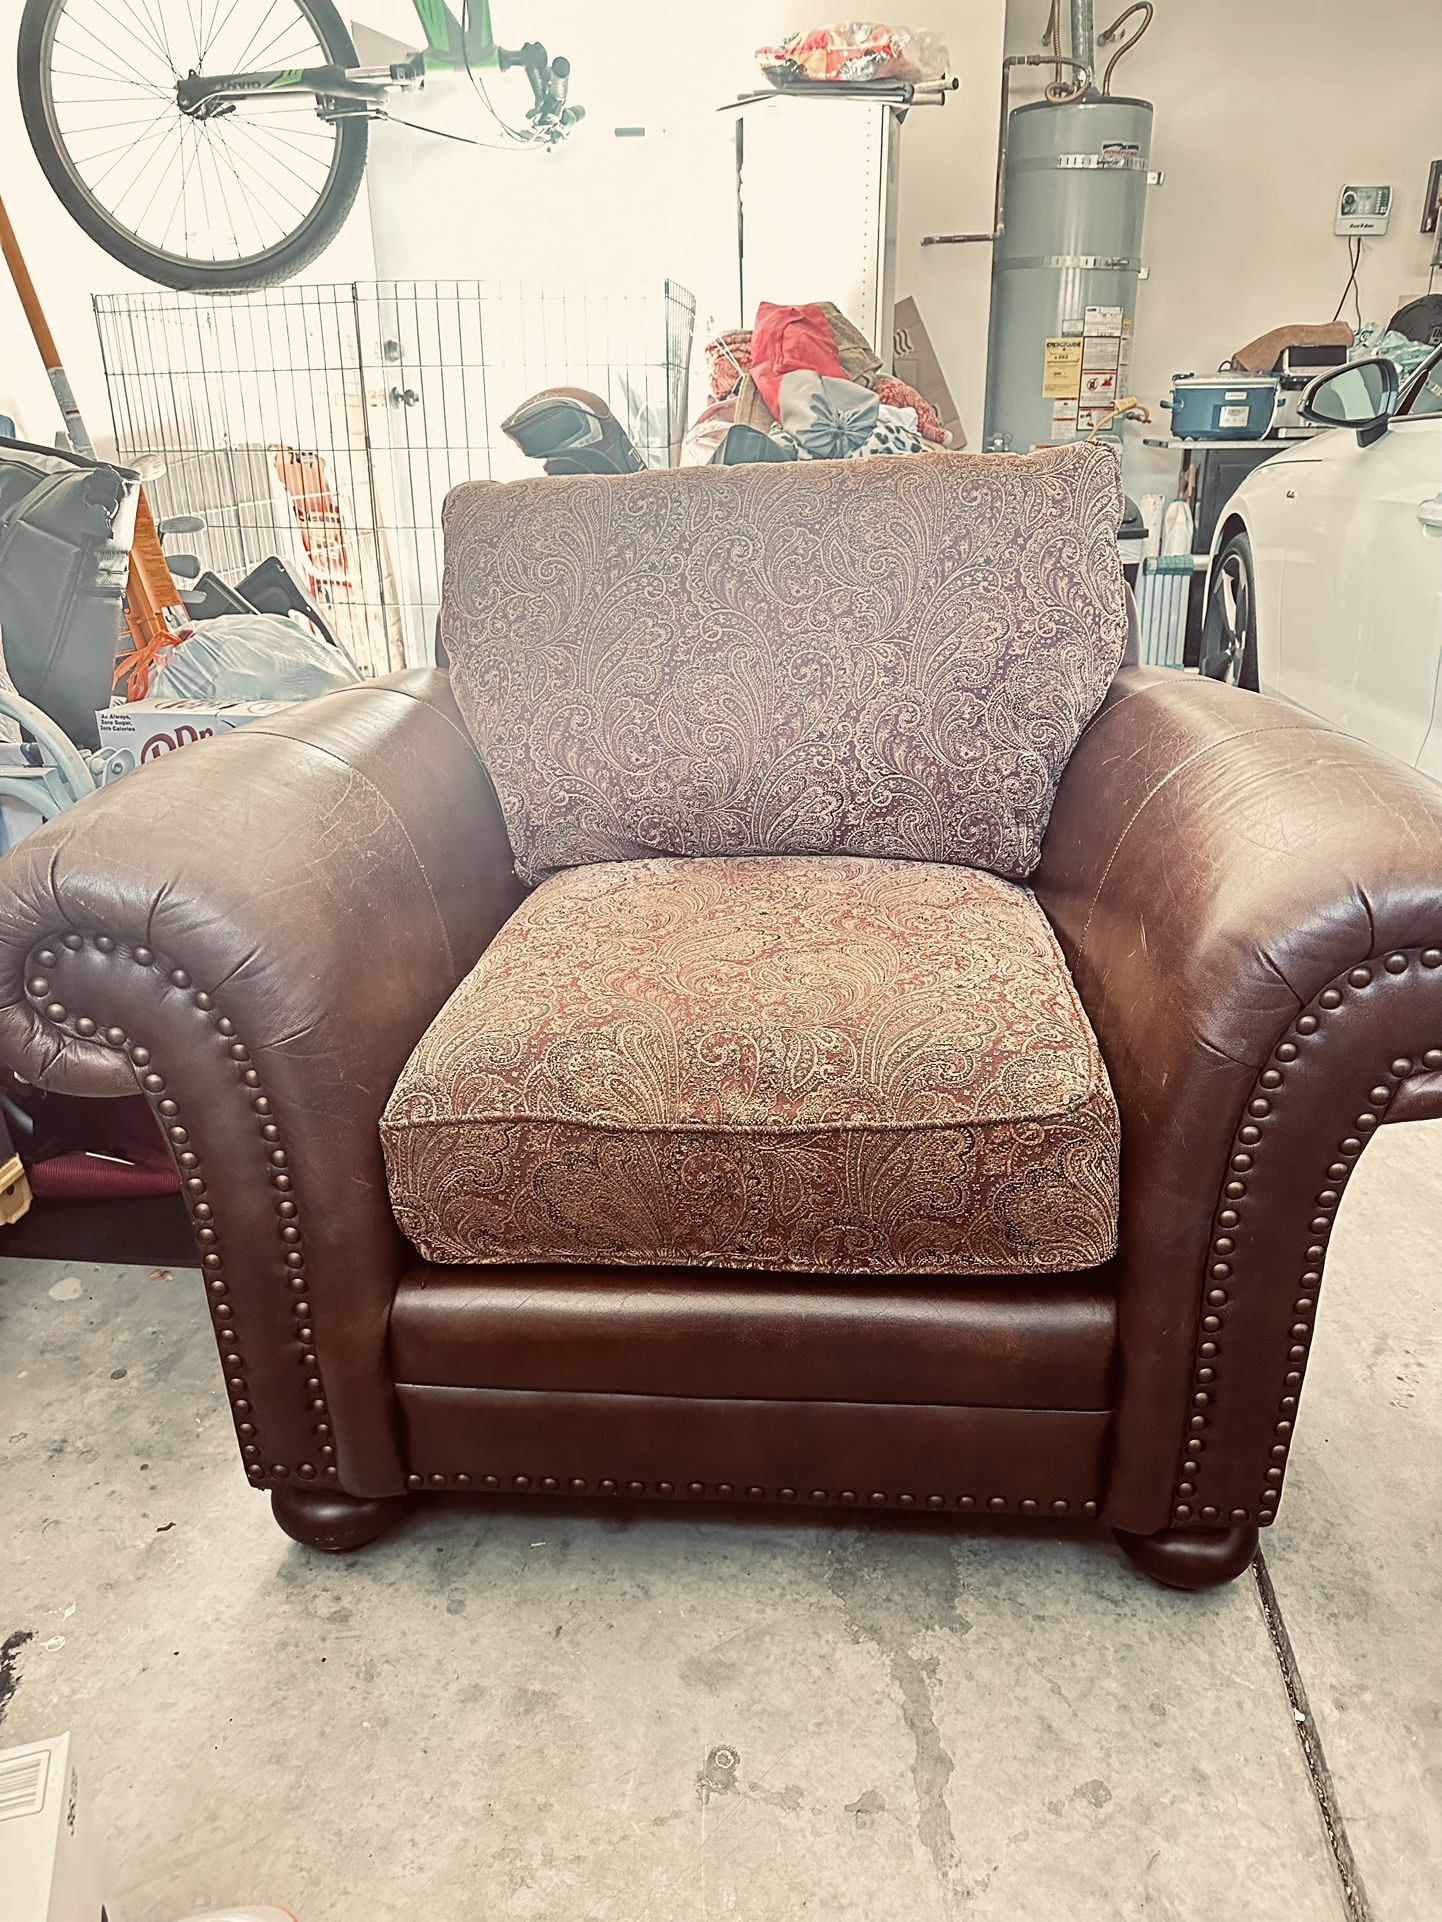 Oversized Leather/fabric Chair